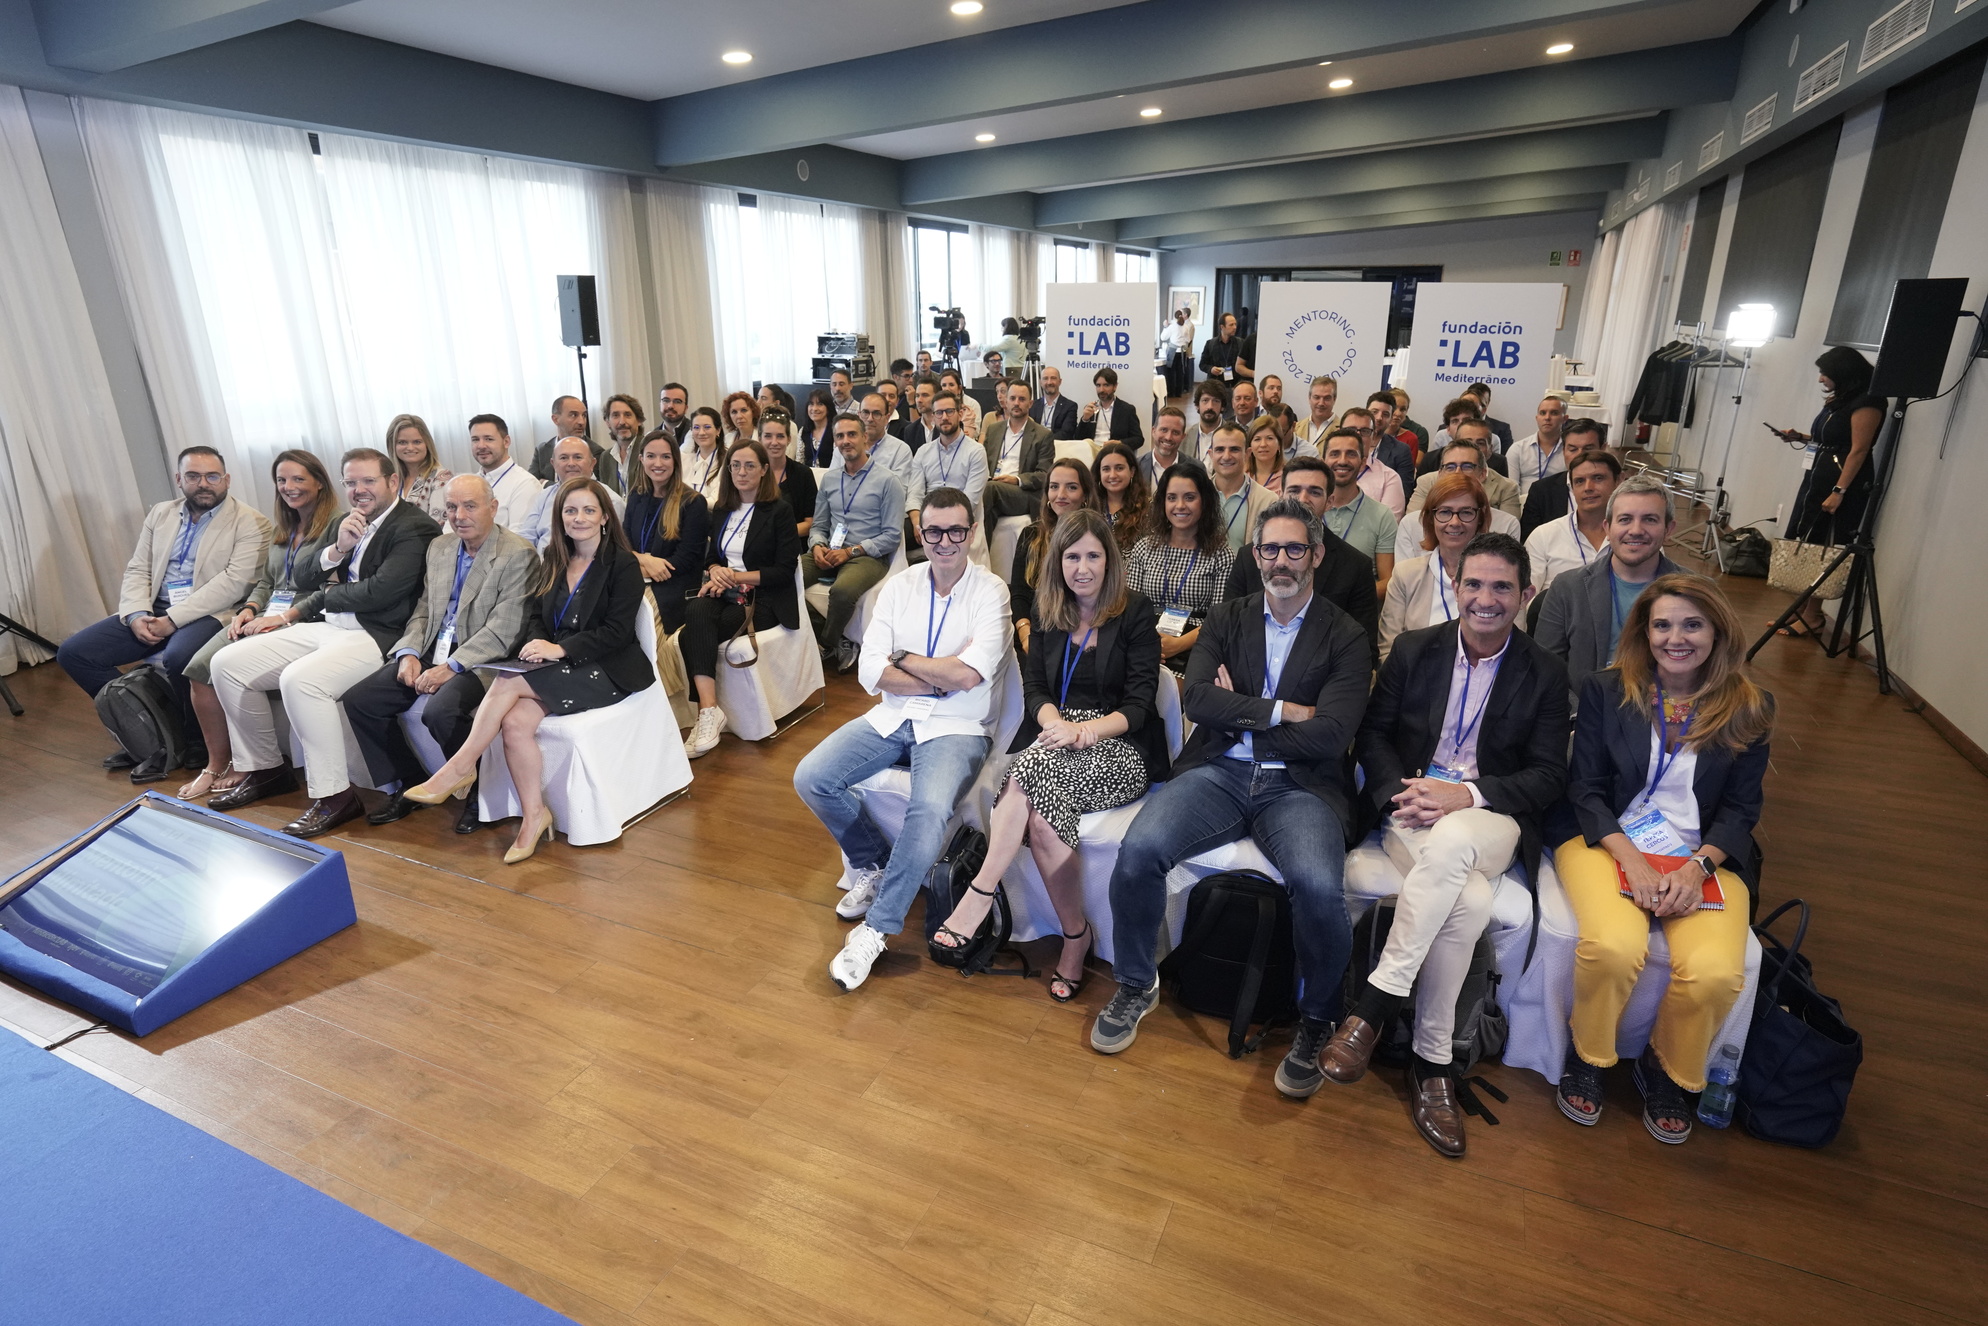 Fundación LAB Mediterráneo holds its II Unlimited Mentoring to help SMEs overcome challenges relating to innovation and technology